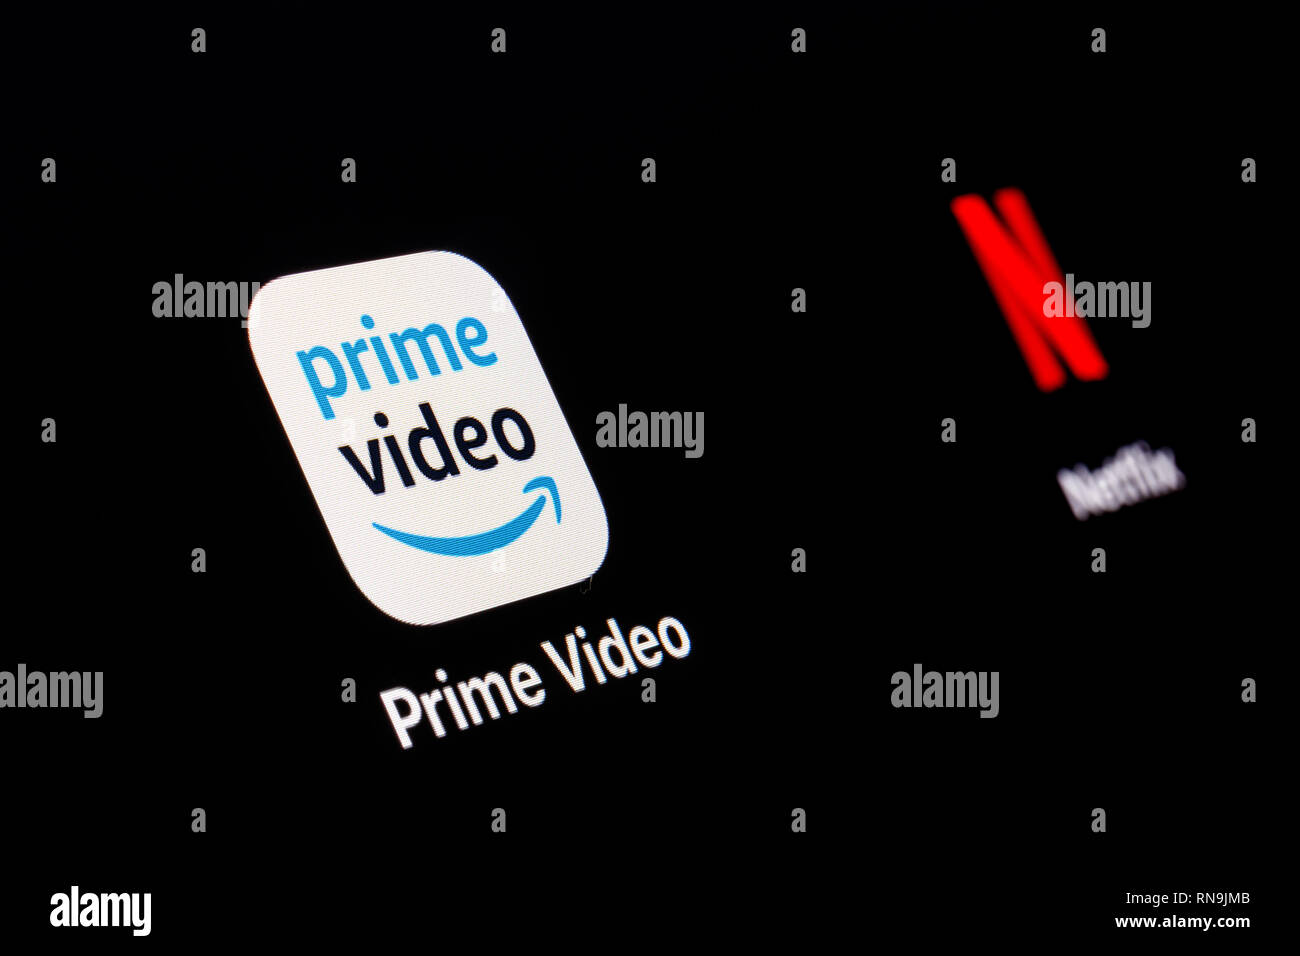 Indianapolis Circa February 19 Prime Video And Netflix App Logos Prime Video Is A Service Of Amazon And Amazon Com Ii Stock Photo Alamy